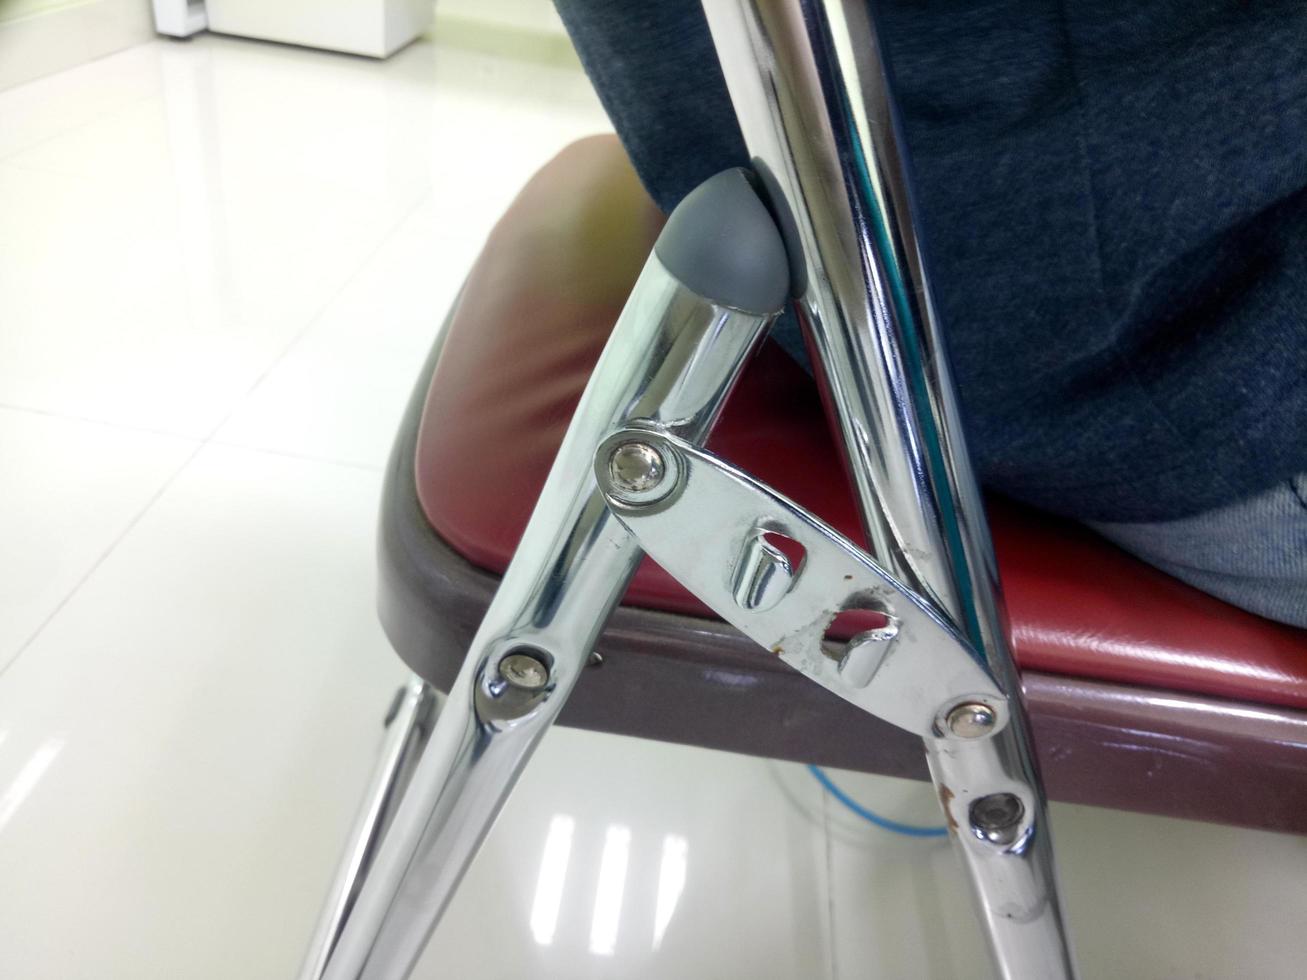 folding chair frame made of metal. folding chairs are often used in university classes photo